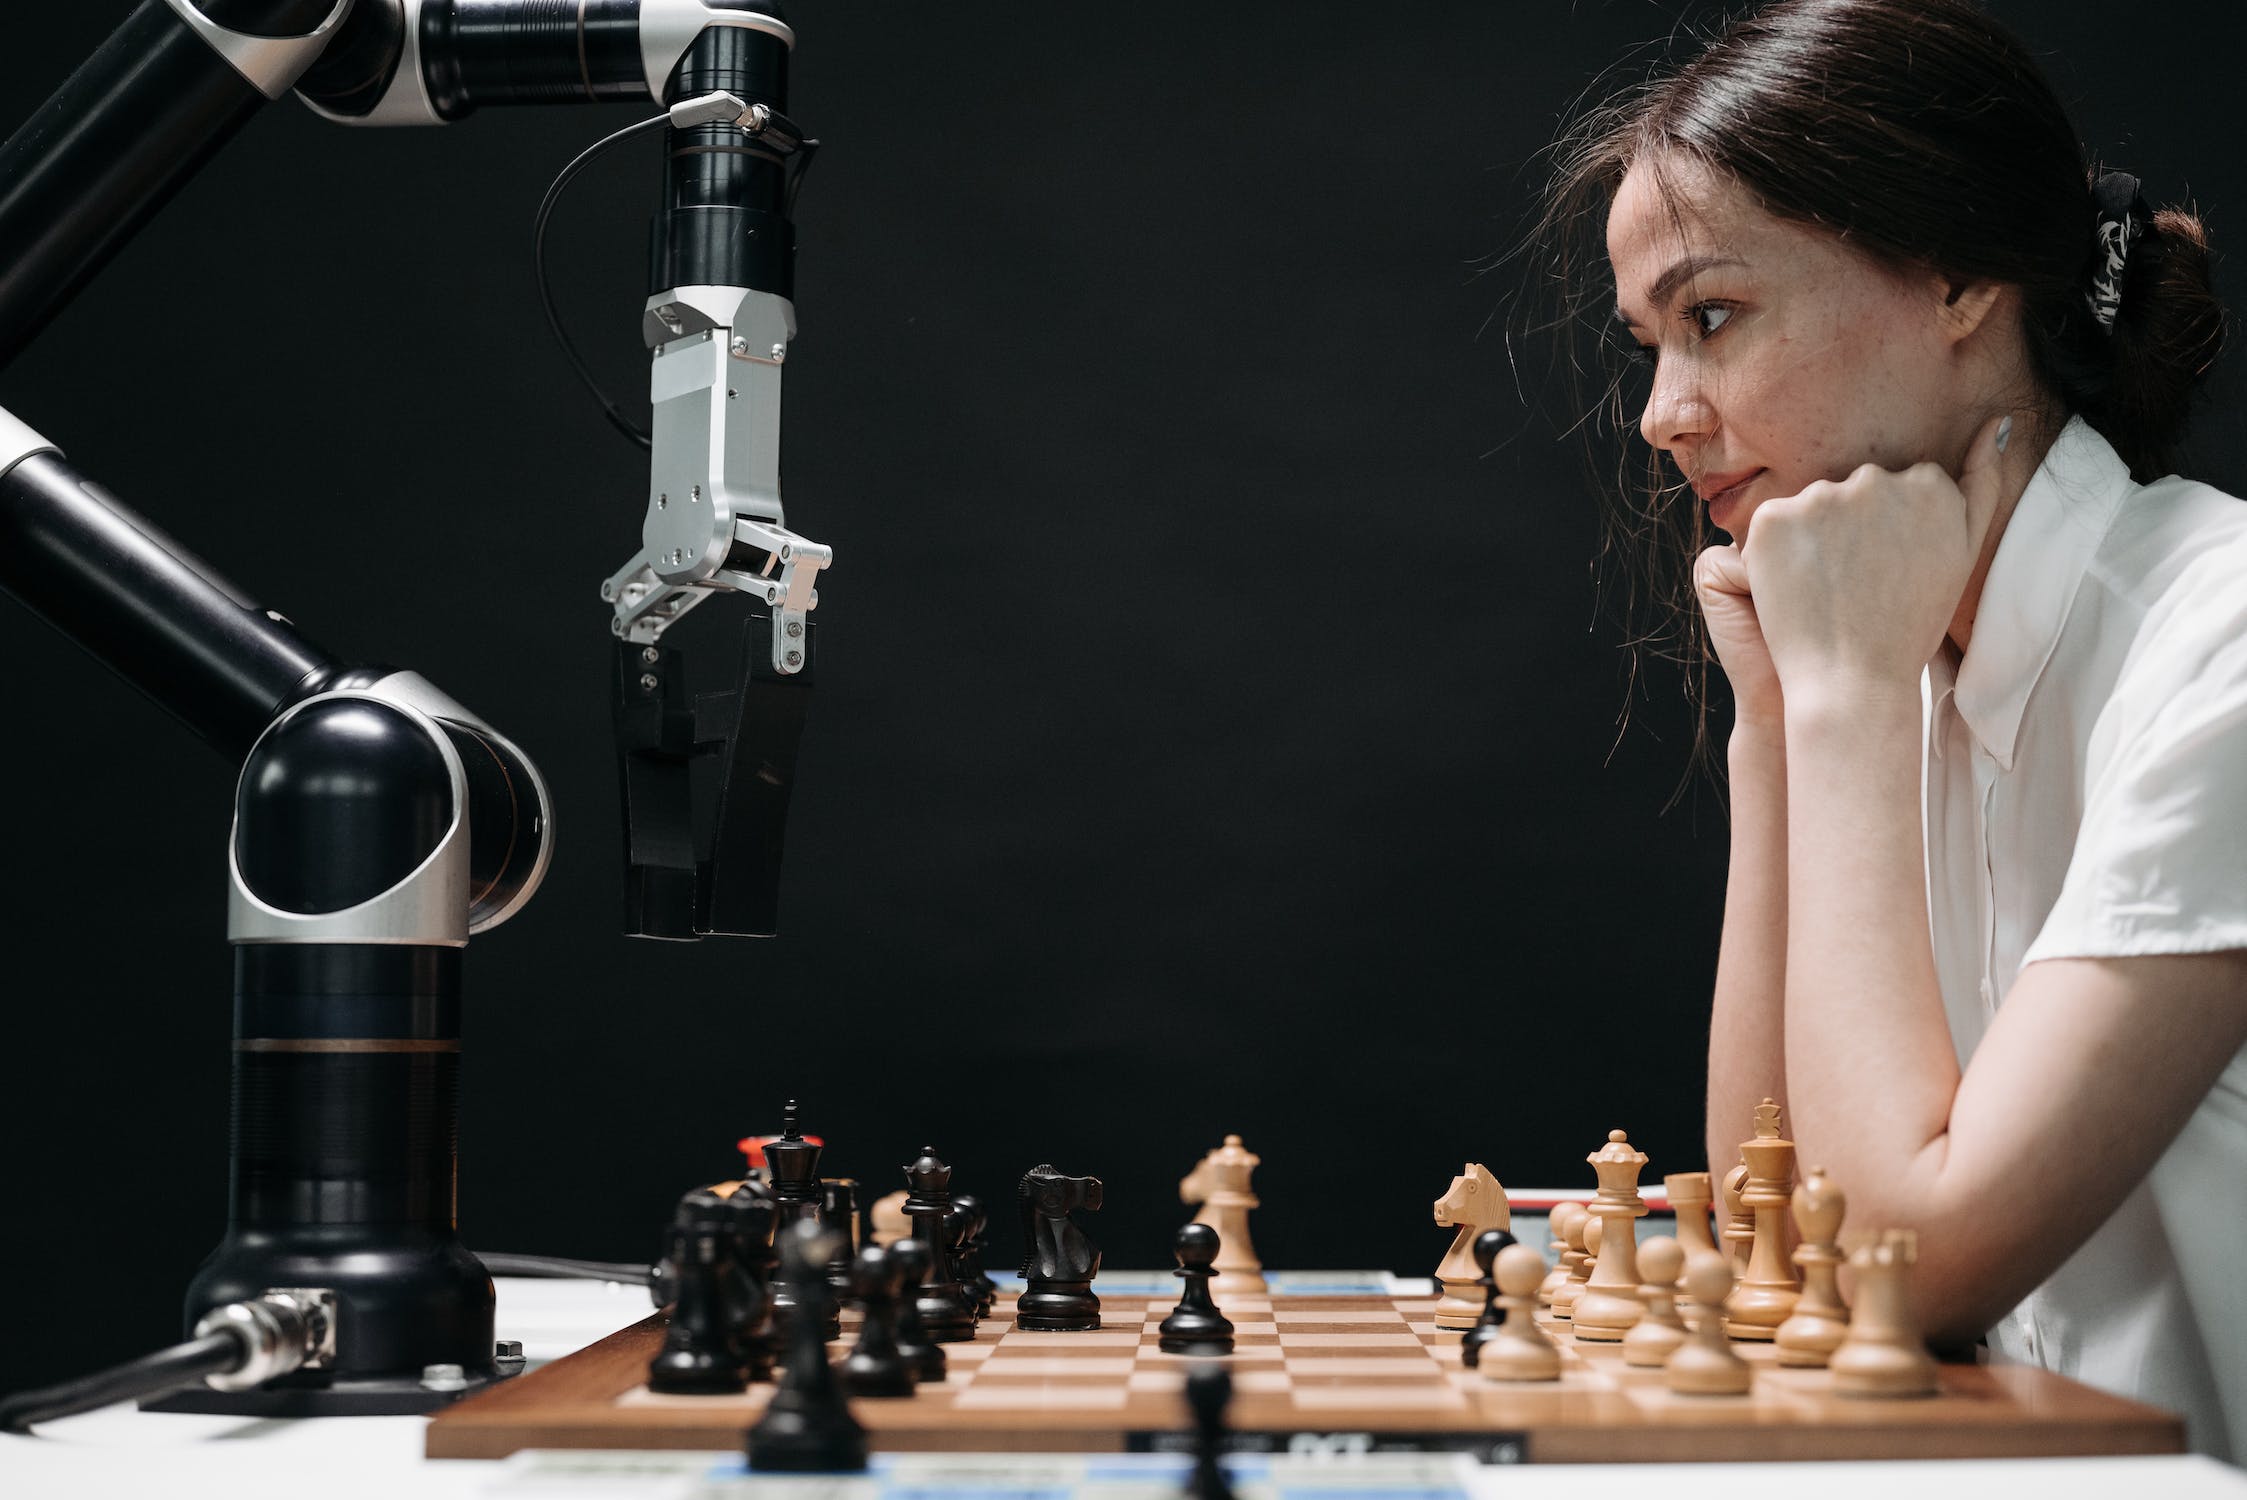 Would AlphaZero keep improving at chess if it kept playing against